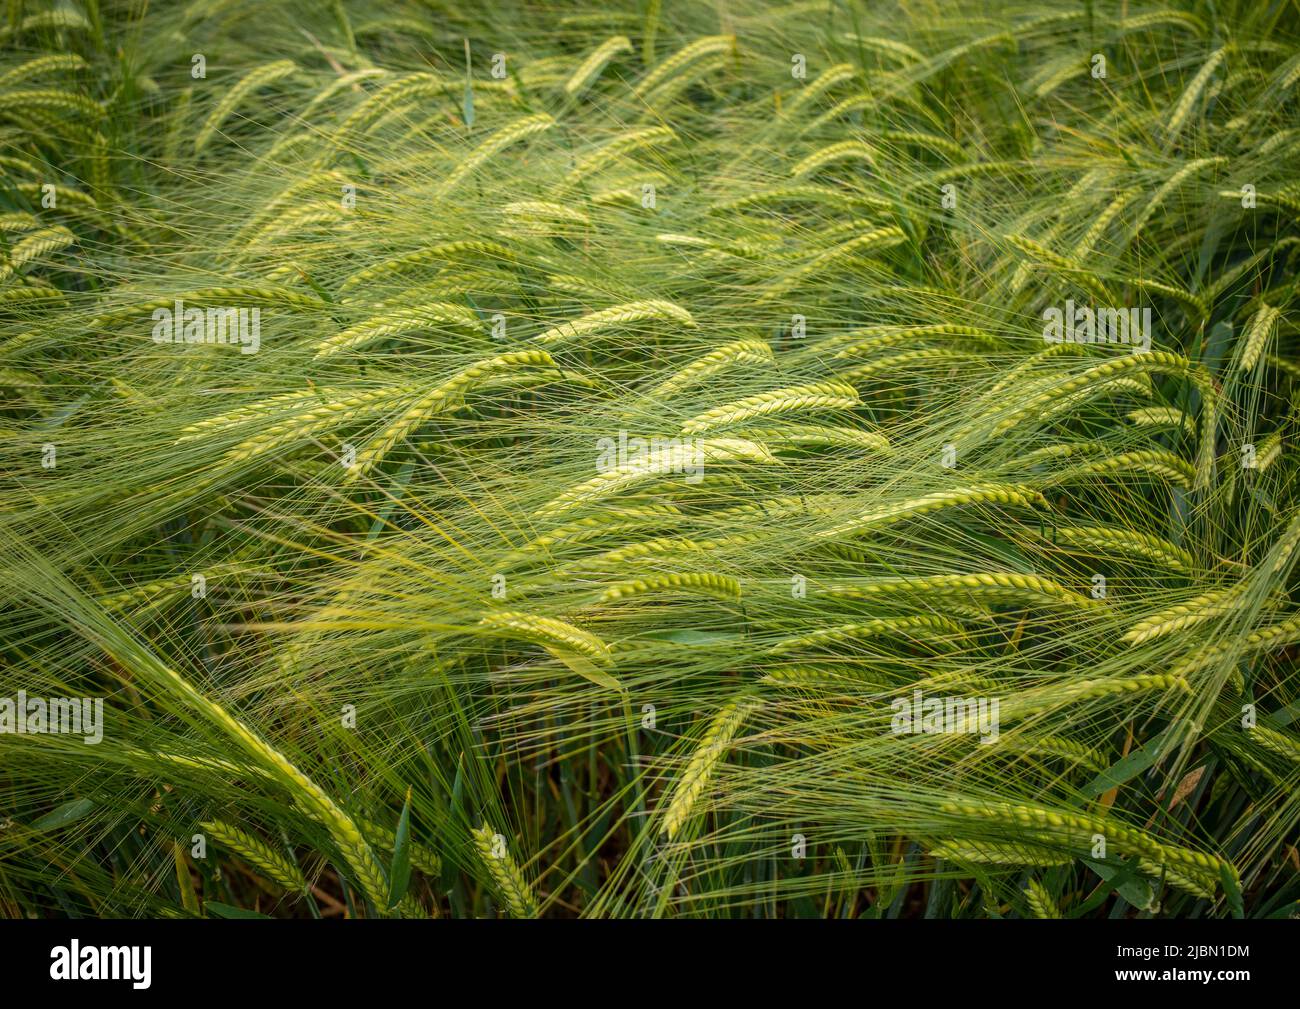 A number of green ears of wheat or barley in a field with a bright green background on a sunny day Stock Photo